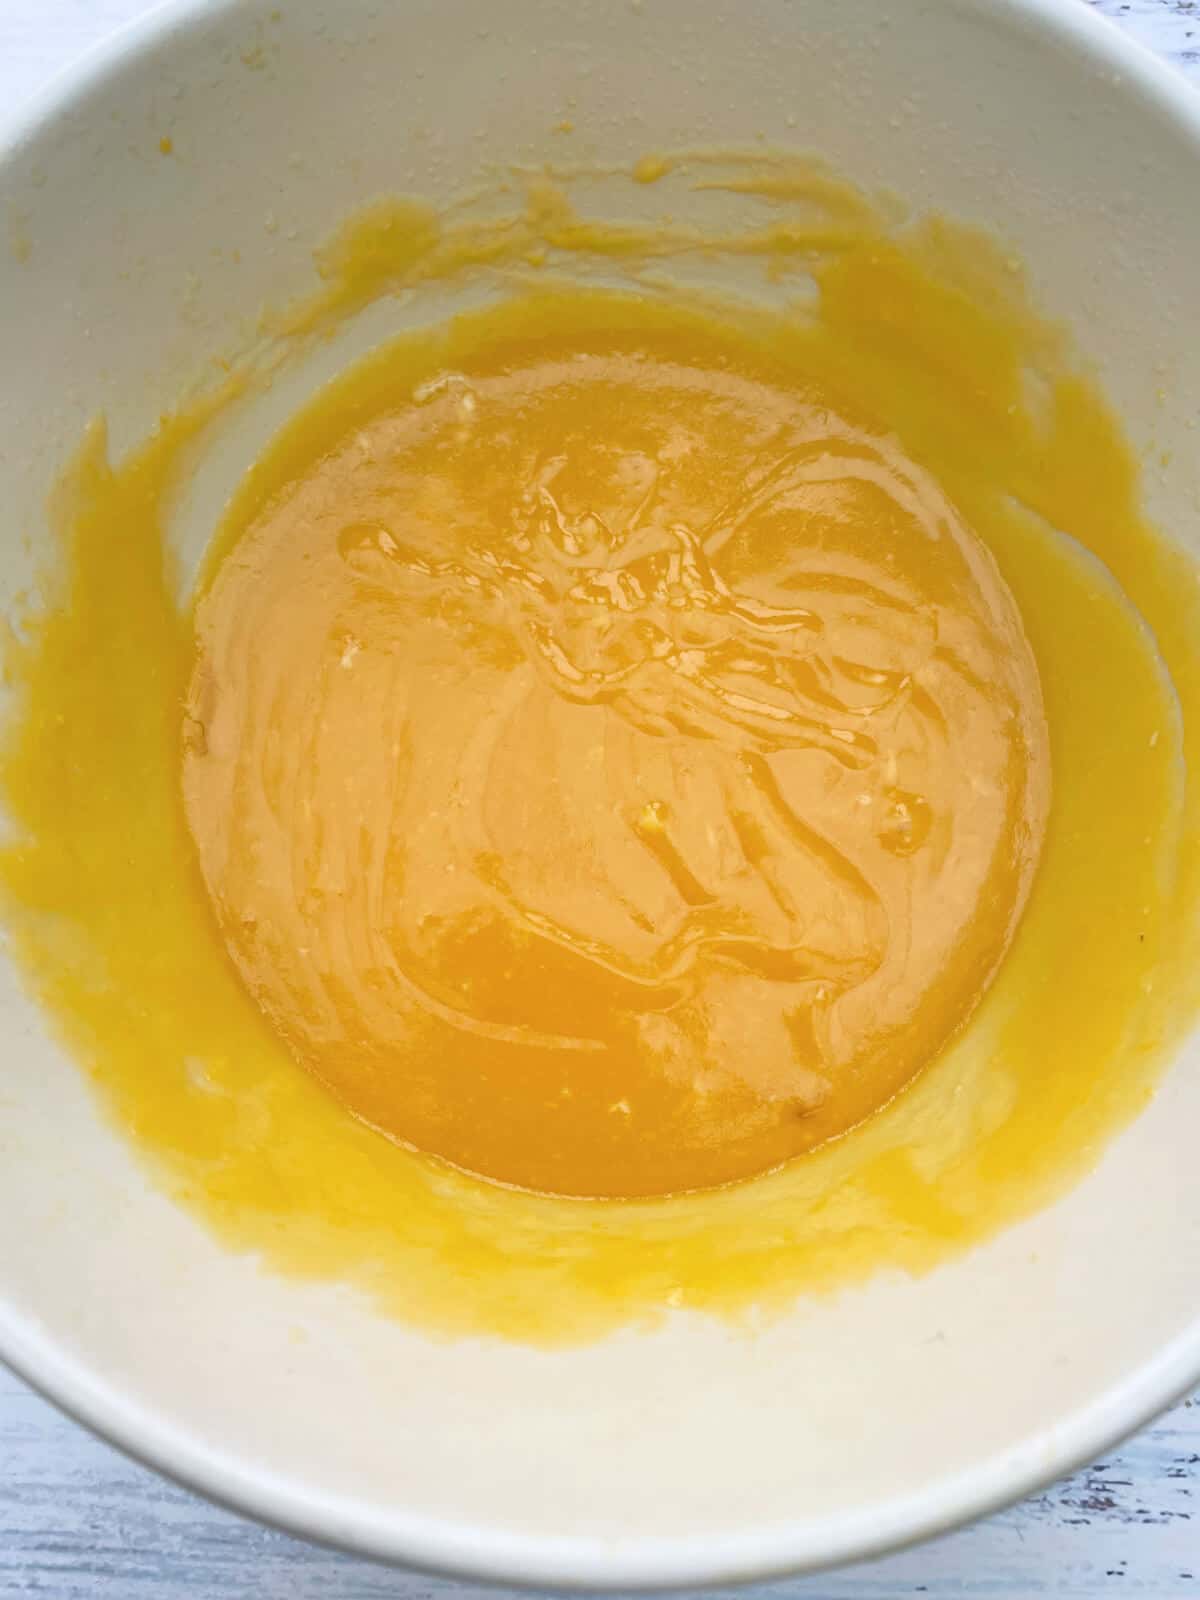 Passionfruit curd or butter thickened up in a bowl.